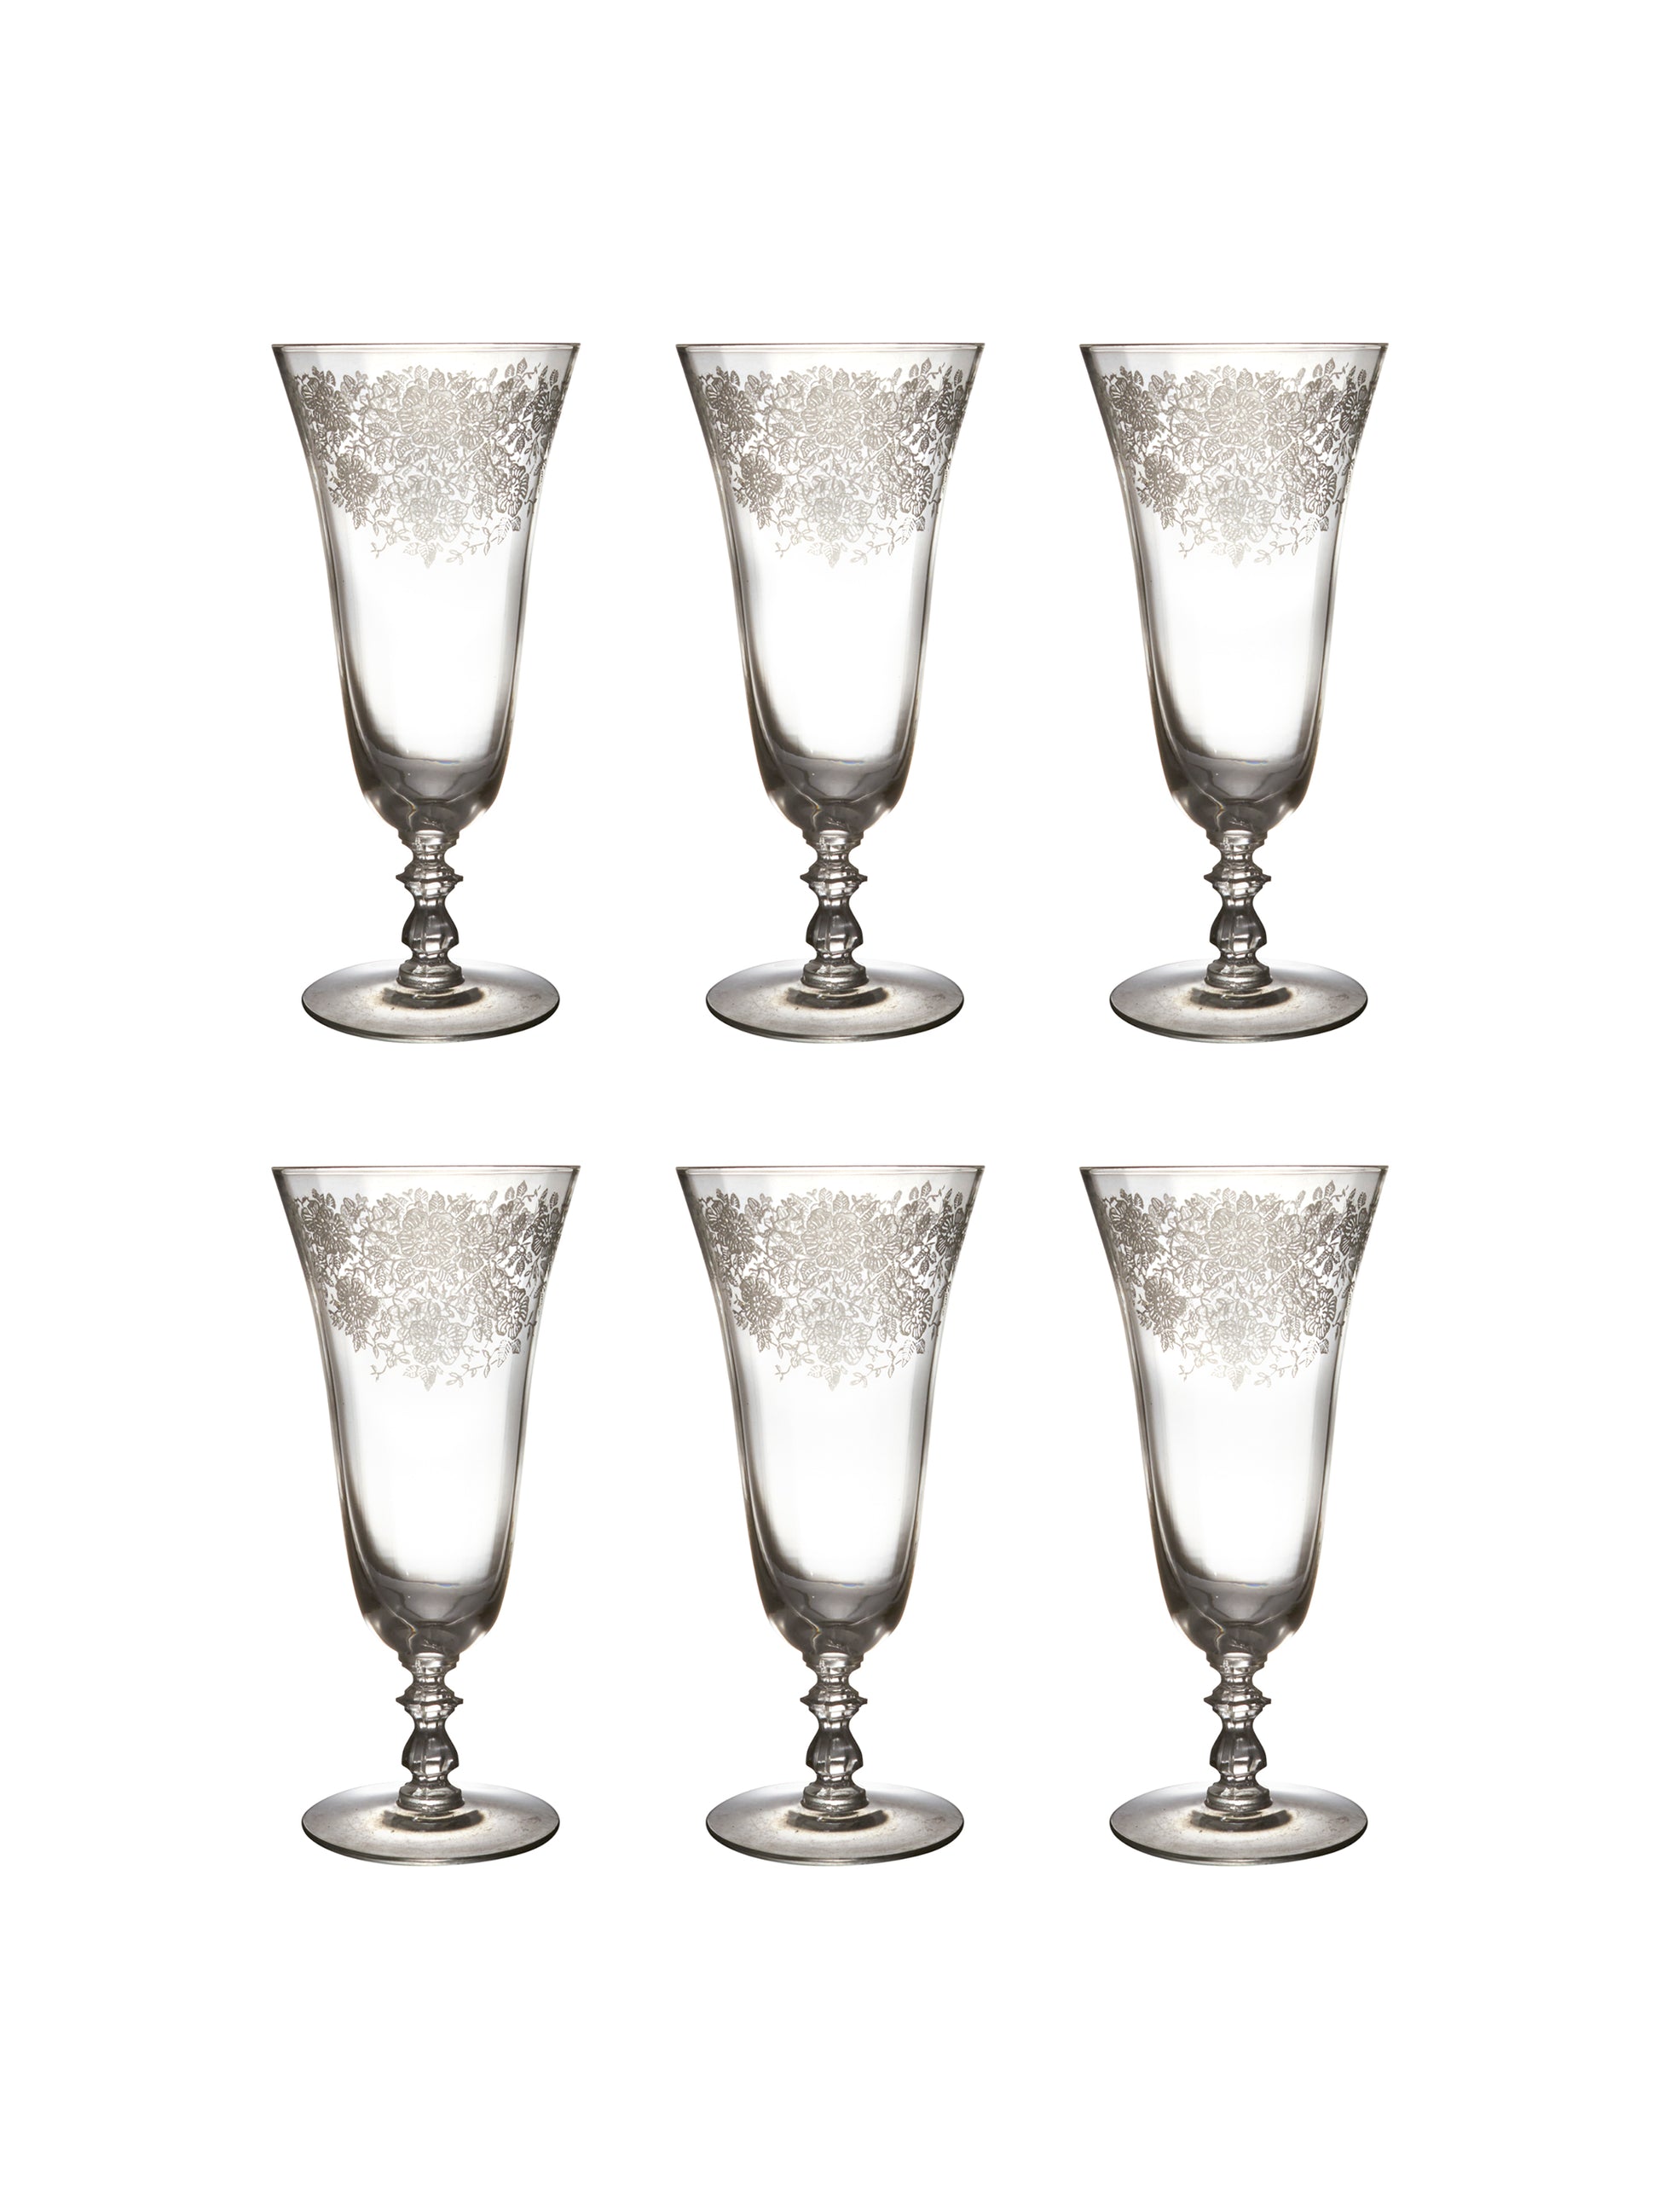 Vintage 1950s Floral Etched Ice Tea Glasses Set of Six Weston Table